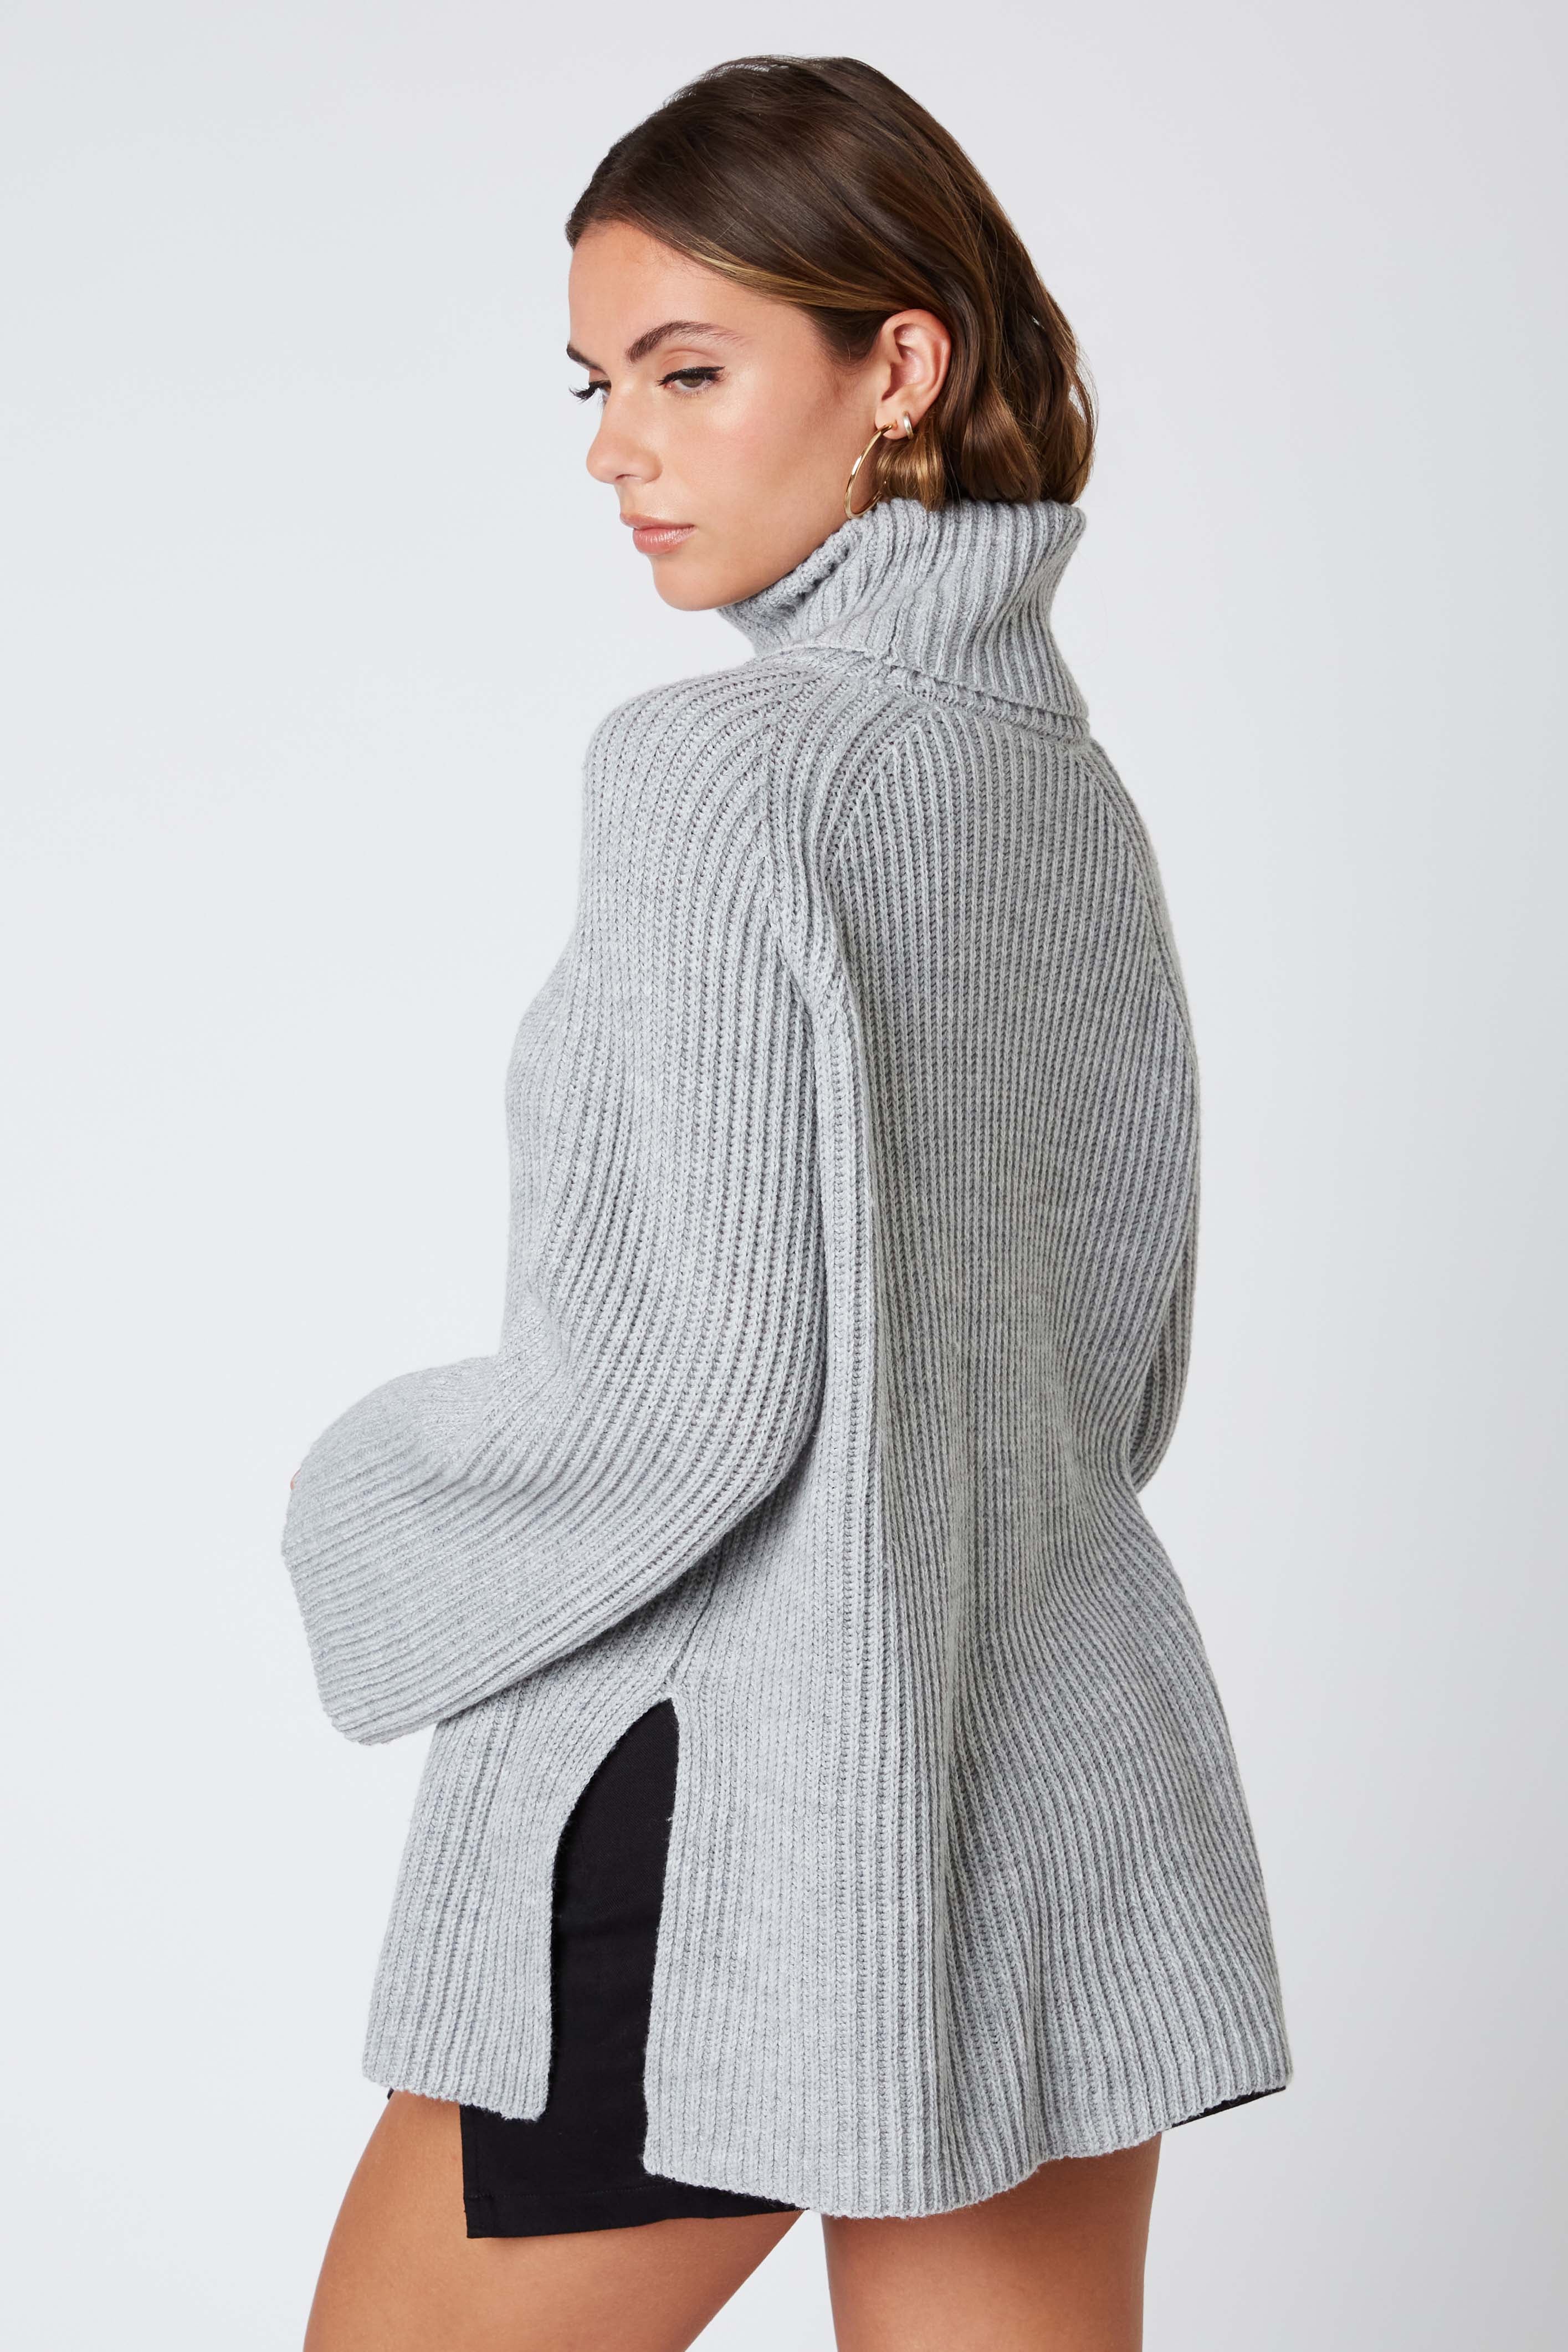 Oversized Turtleneck Sweater in Grey Back View